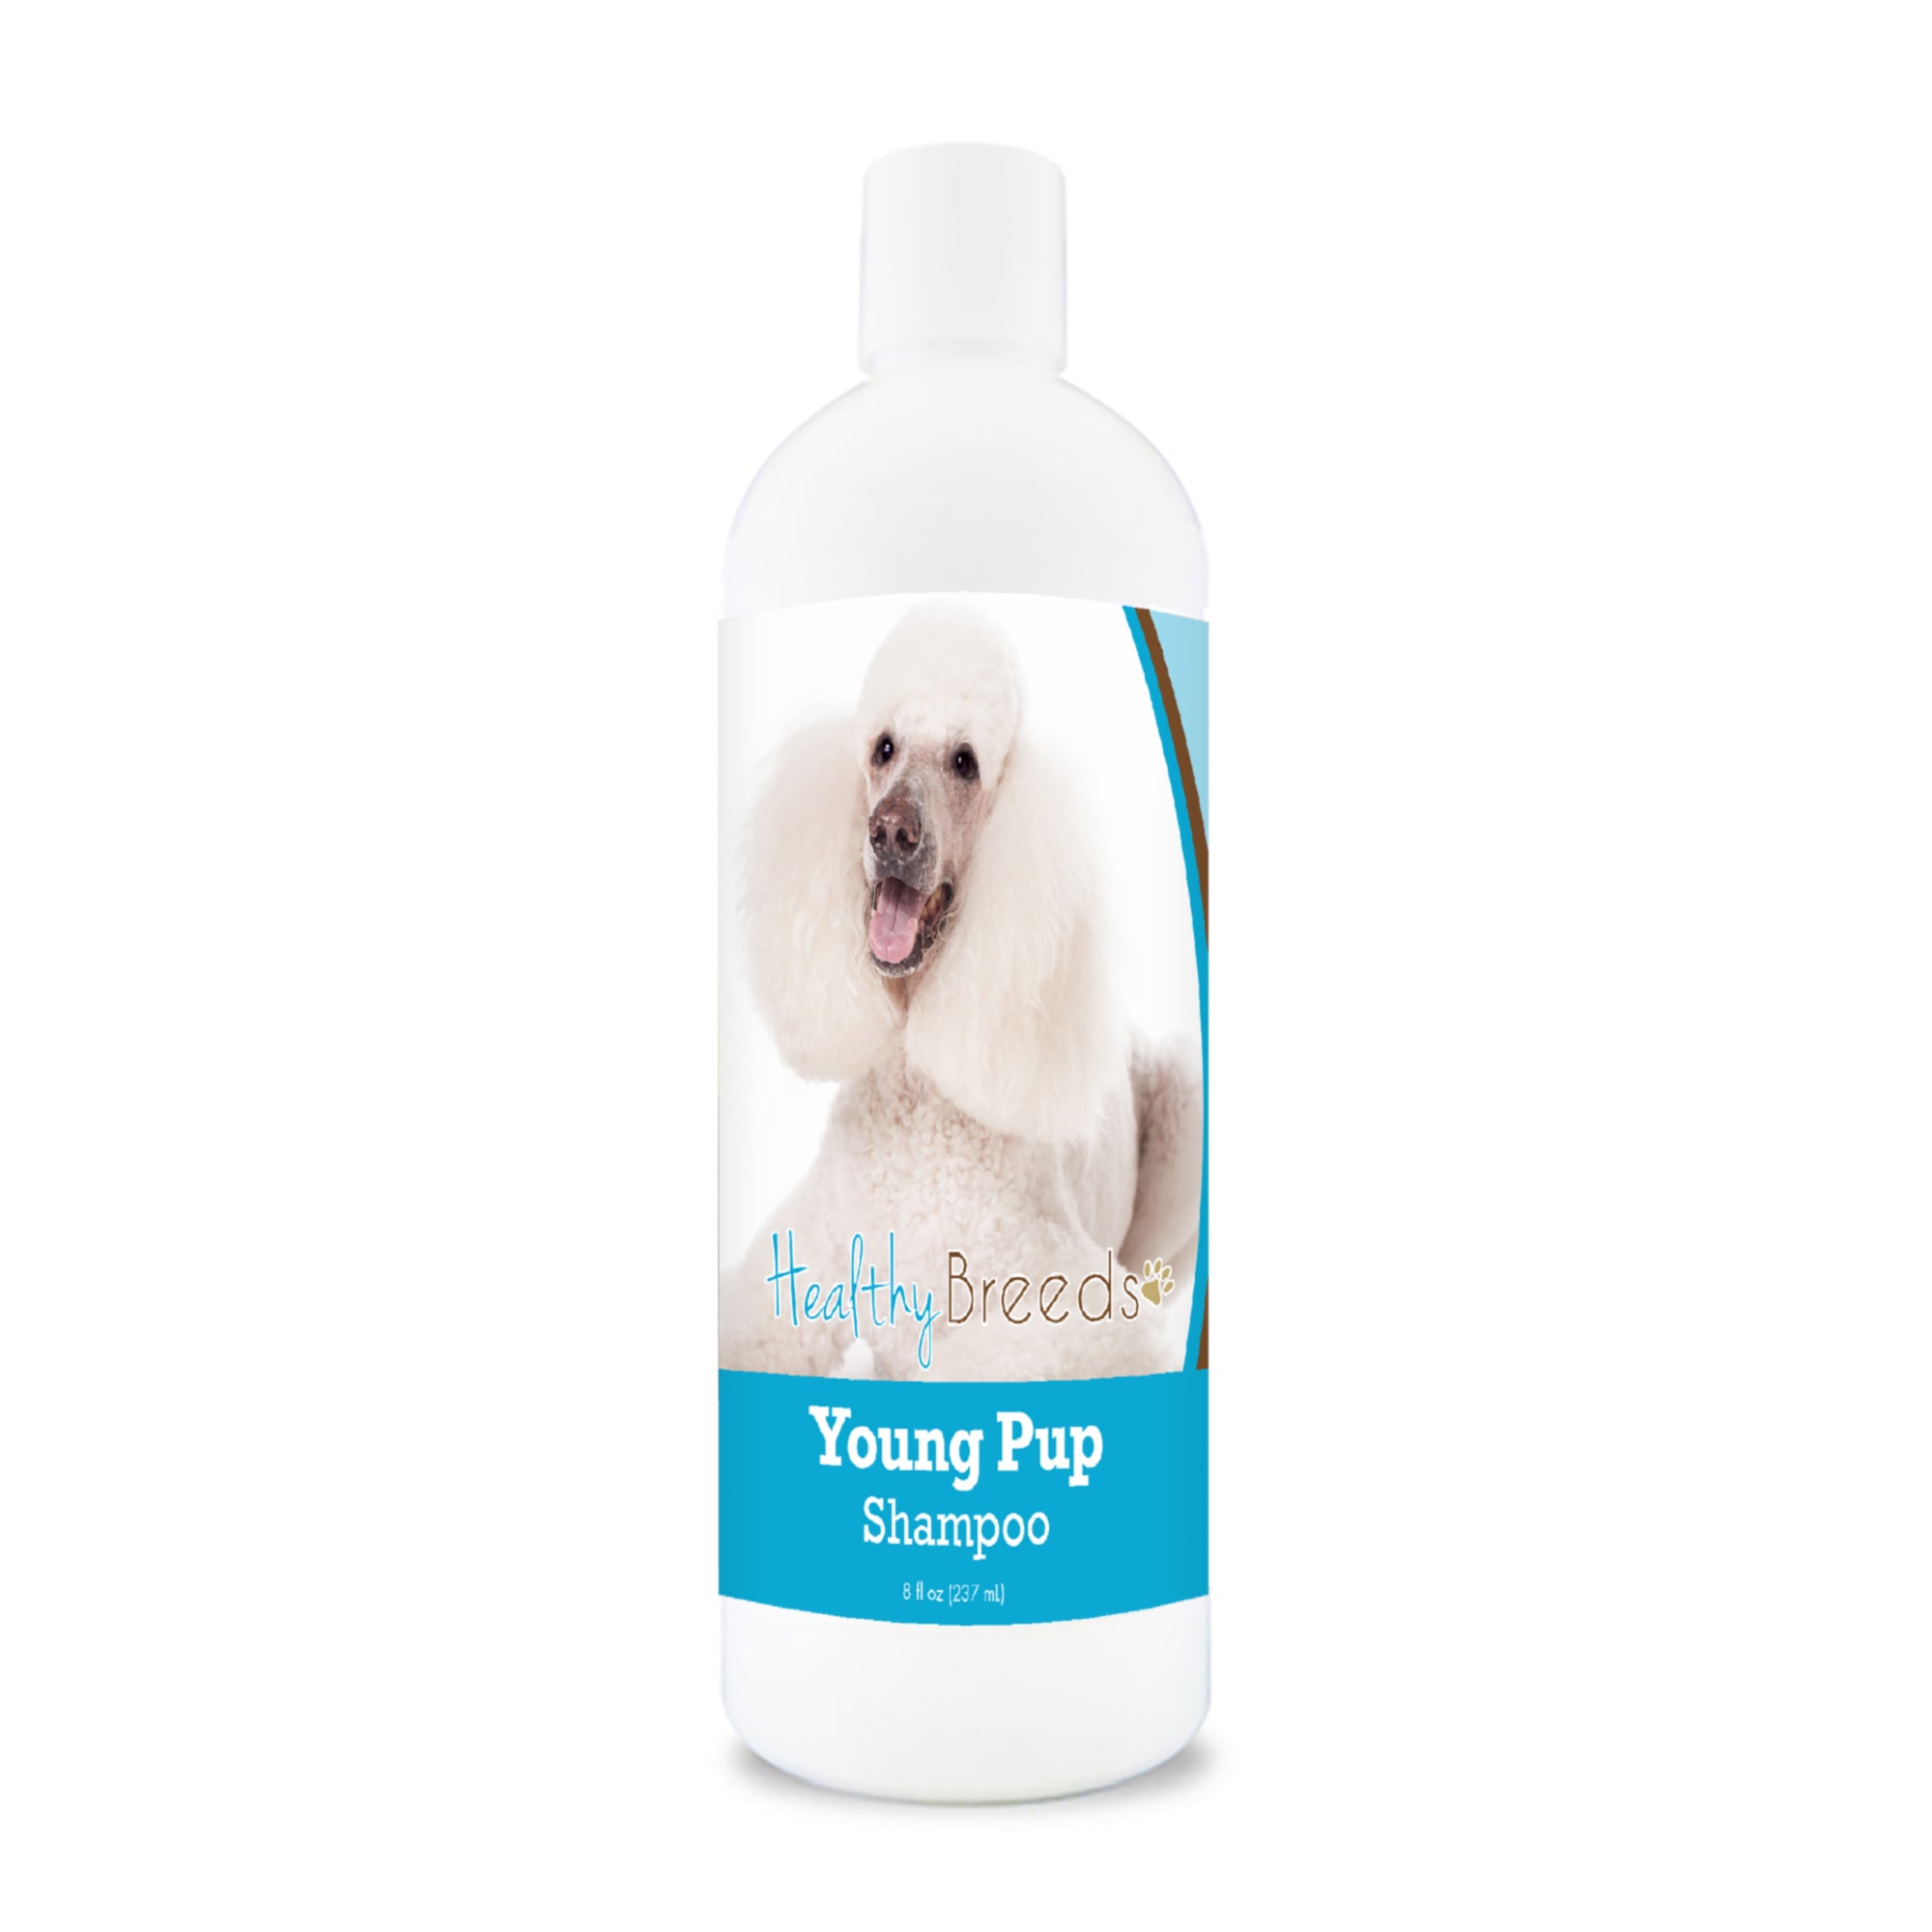 Healthy Breeds Poodle Young Pup Shampoo 8 oz